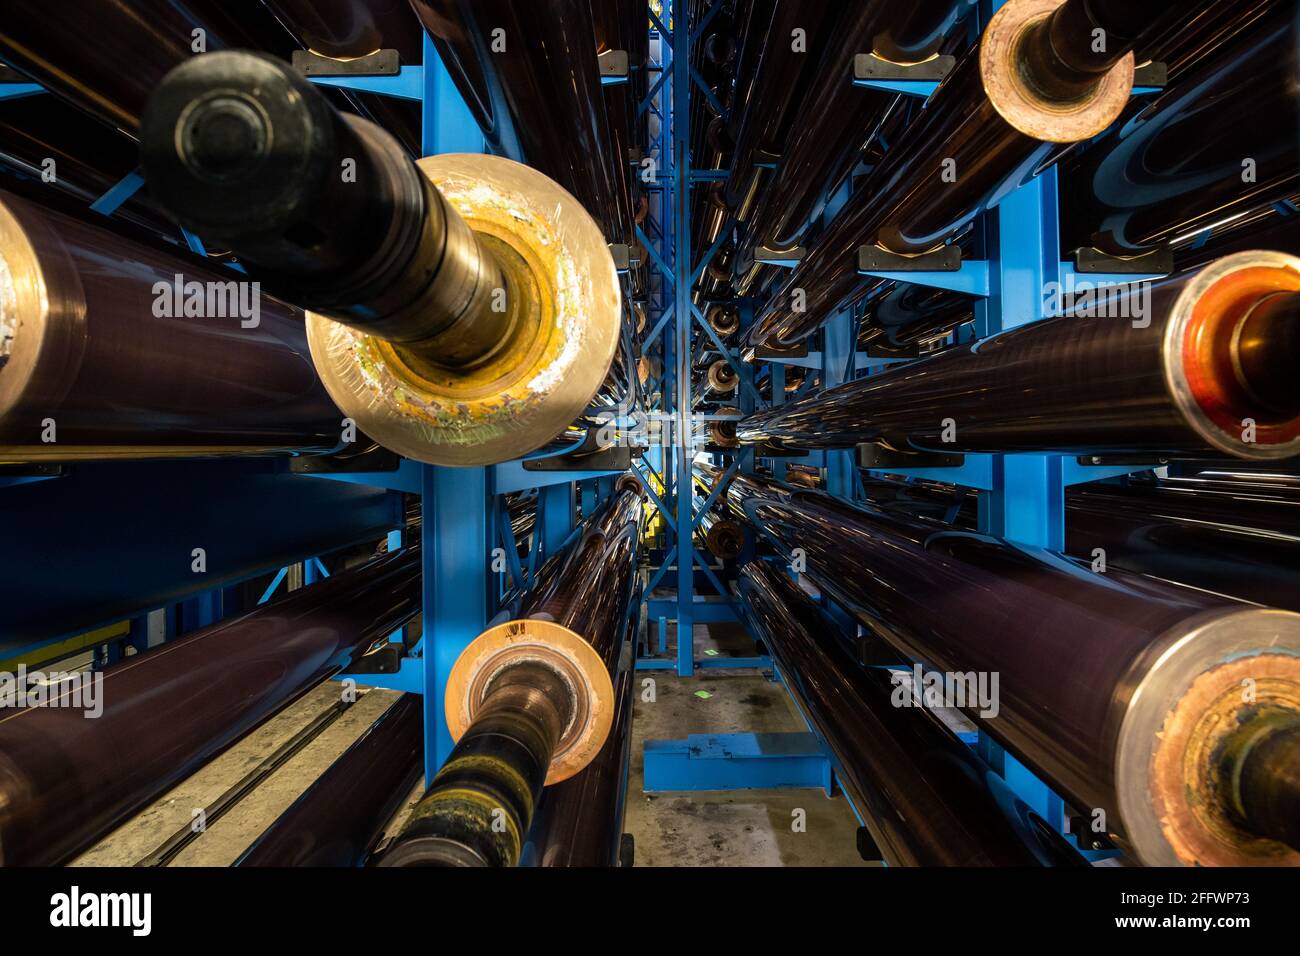 Nuremberg, Germany. 19th Apr, 2021. Copper-plated gravure cylinders lie on shelves in a warehouse at the Prinovis printing company. The Nuremberg-based large-scale printing plant of the Prinovis Group, which is part of the Bertelsmann Group, will close on April 30, 2021. Credit: Daniel Karmann/dpa/Alamy Live News Stock Photo